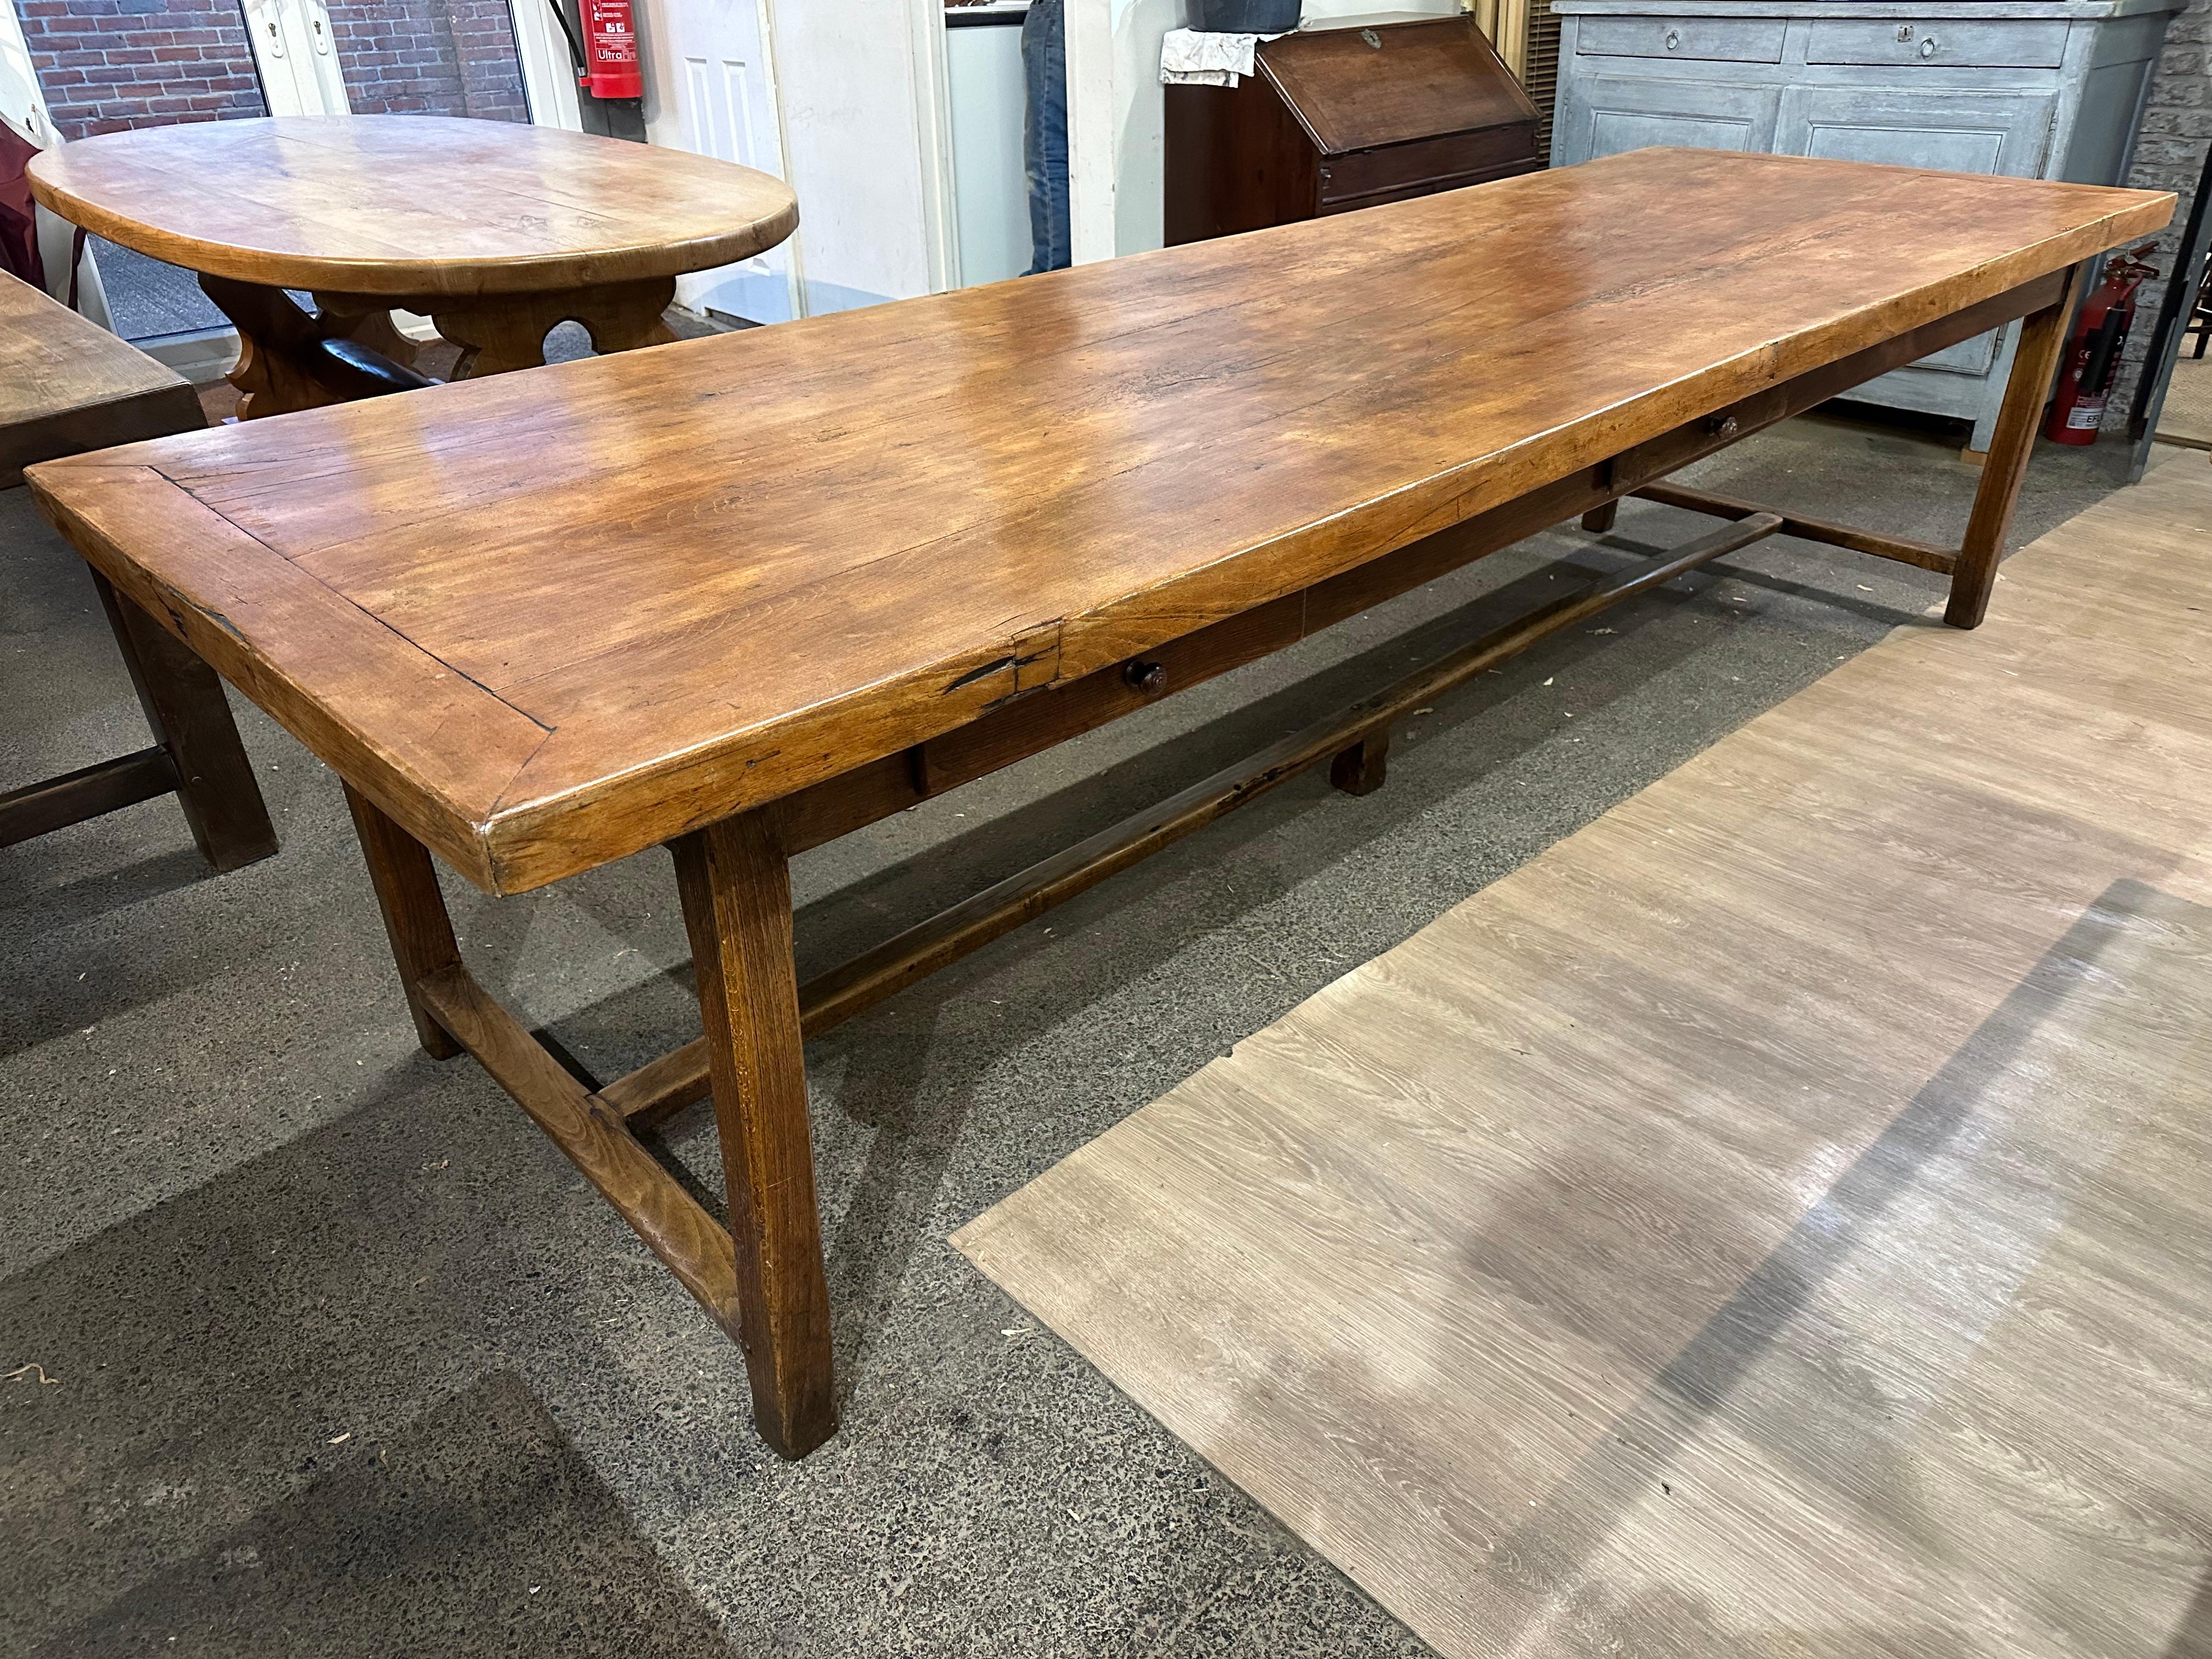 This exquisite early 19th-century farmhouse table is a true statement piece. Crafted from solid beech wood, it boasts a substantial size, measuring 3 meters in length and 1 meter in width. The table's rich honey colour exudes any space. The table